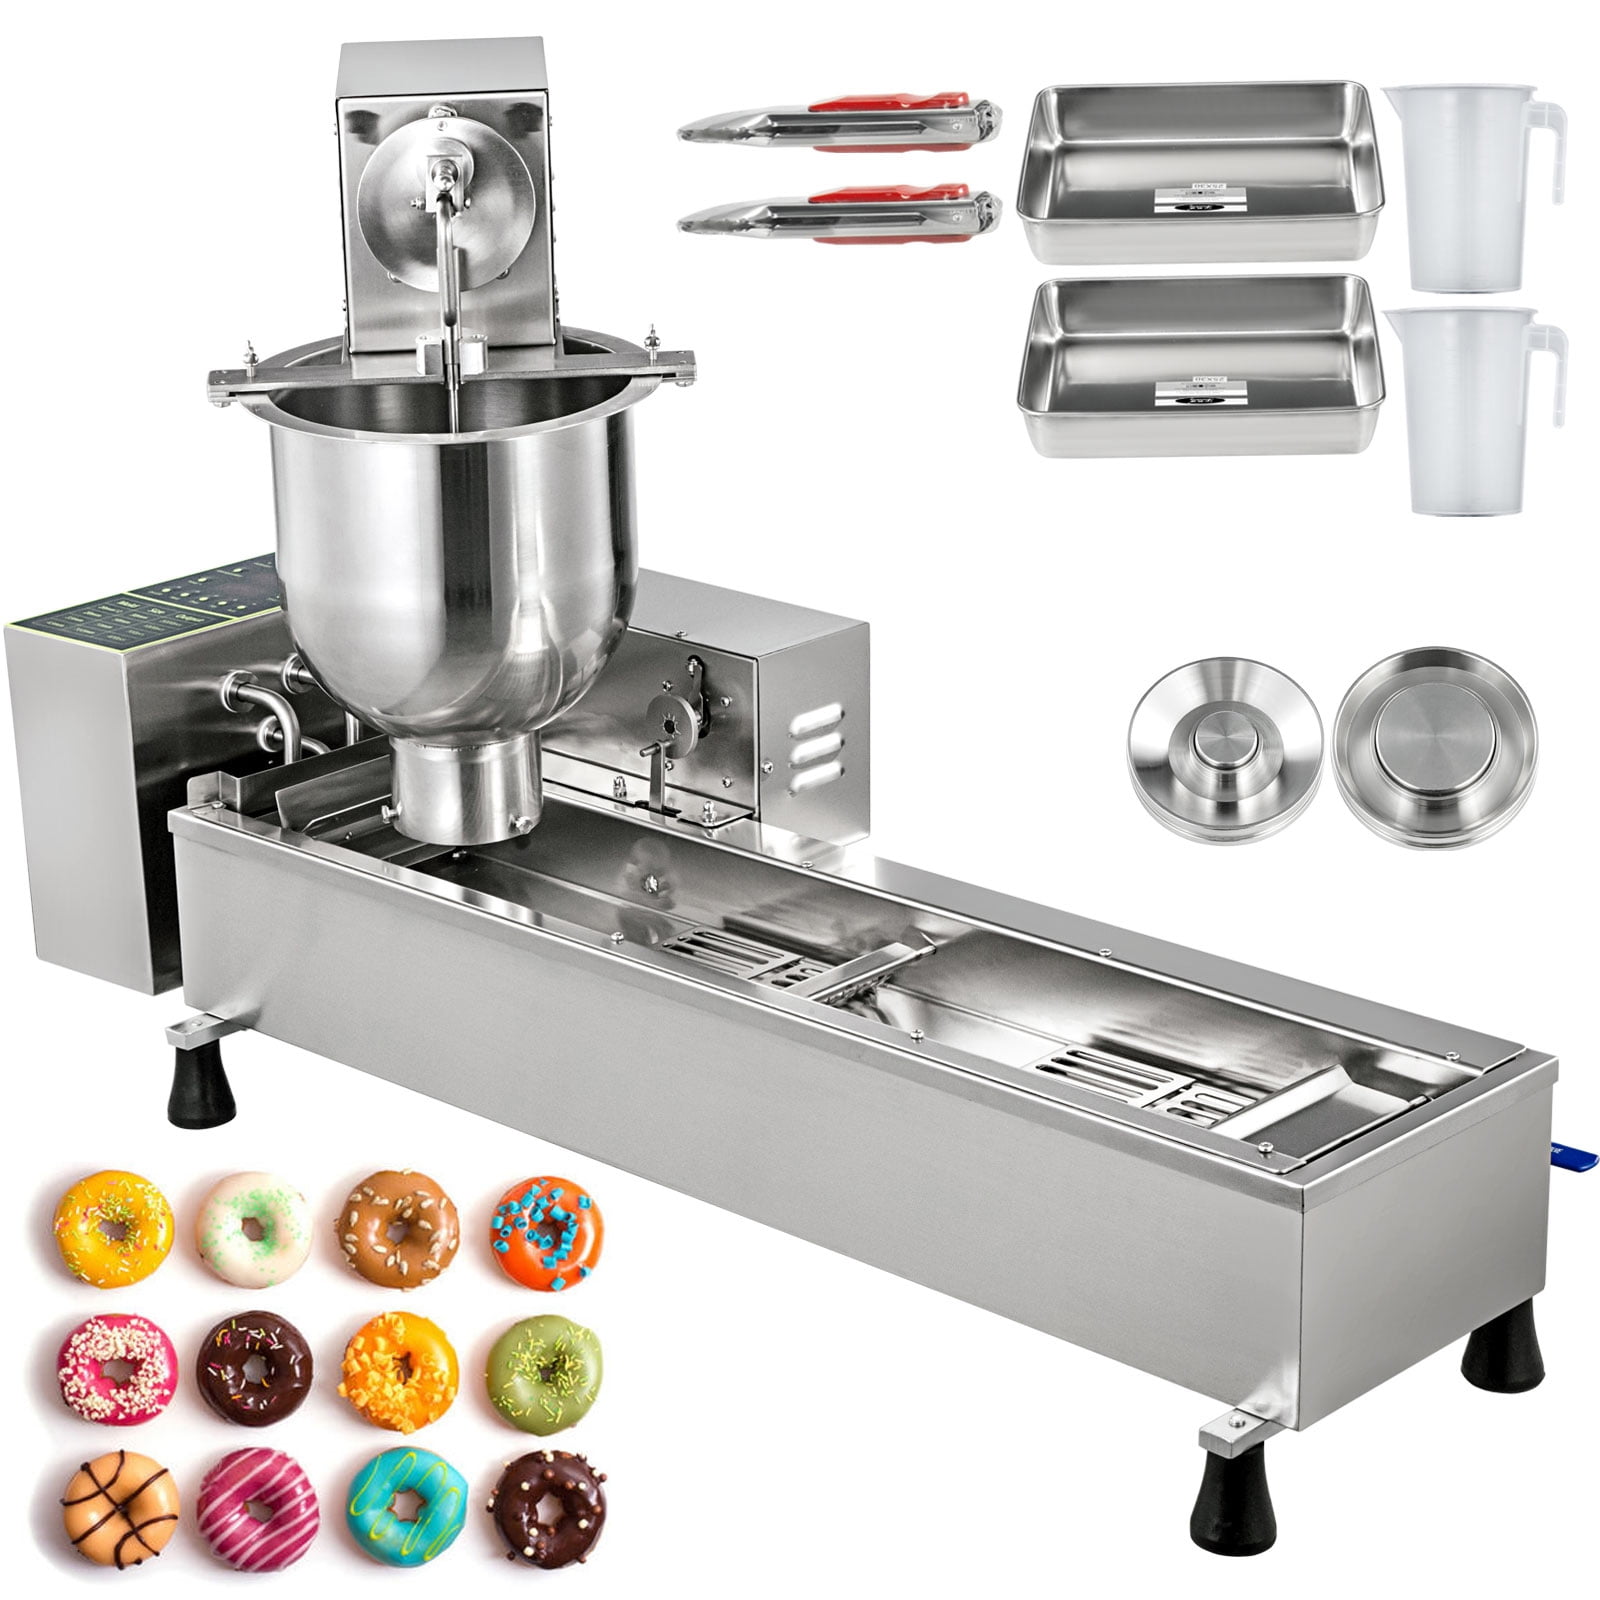 Mouind Mini Donut Maker Machine, 6 Hole Stainless Steel Donut